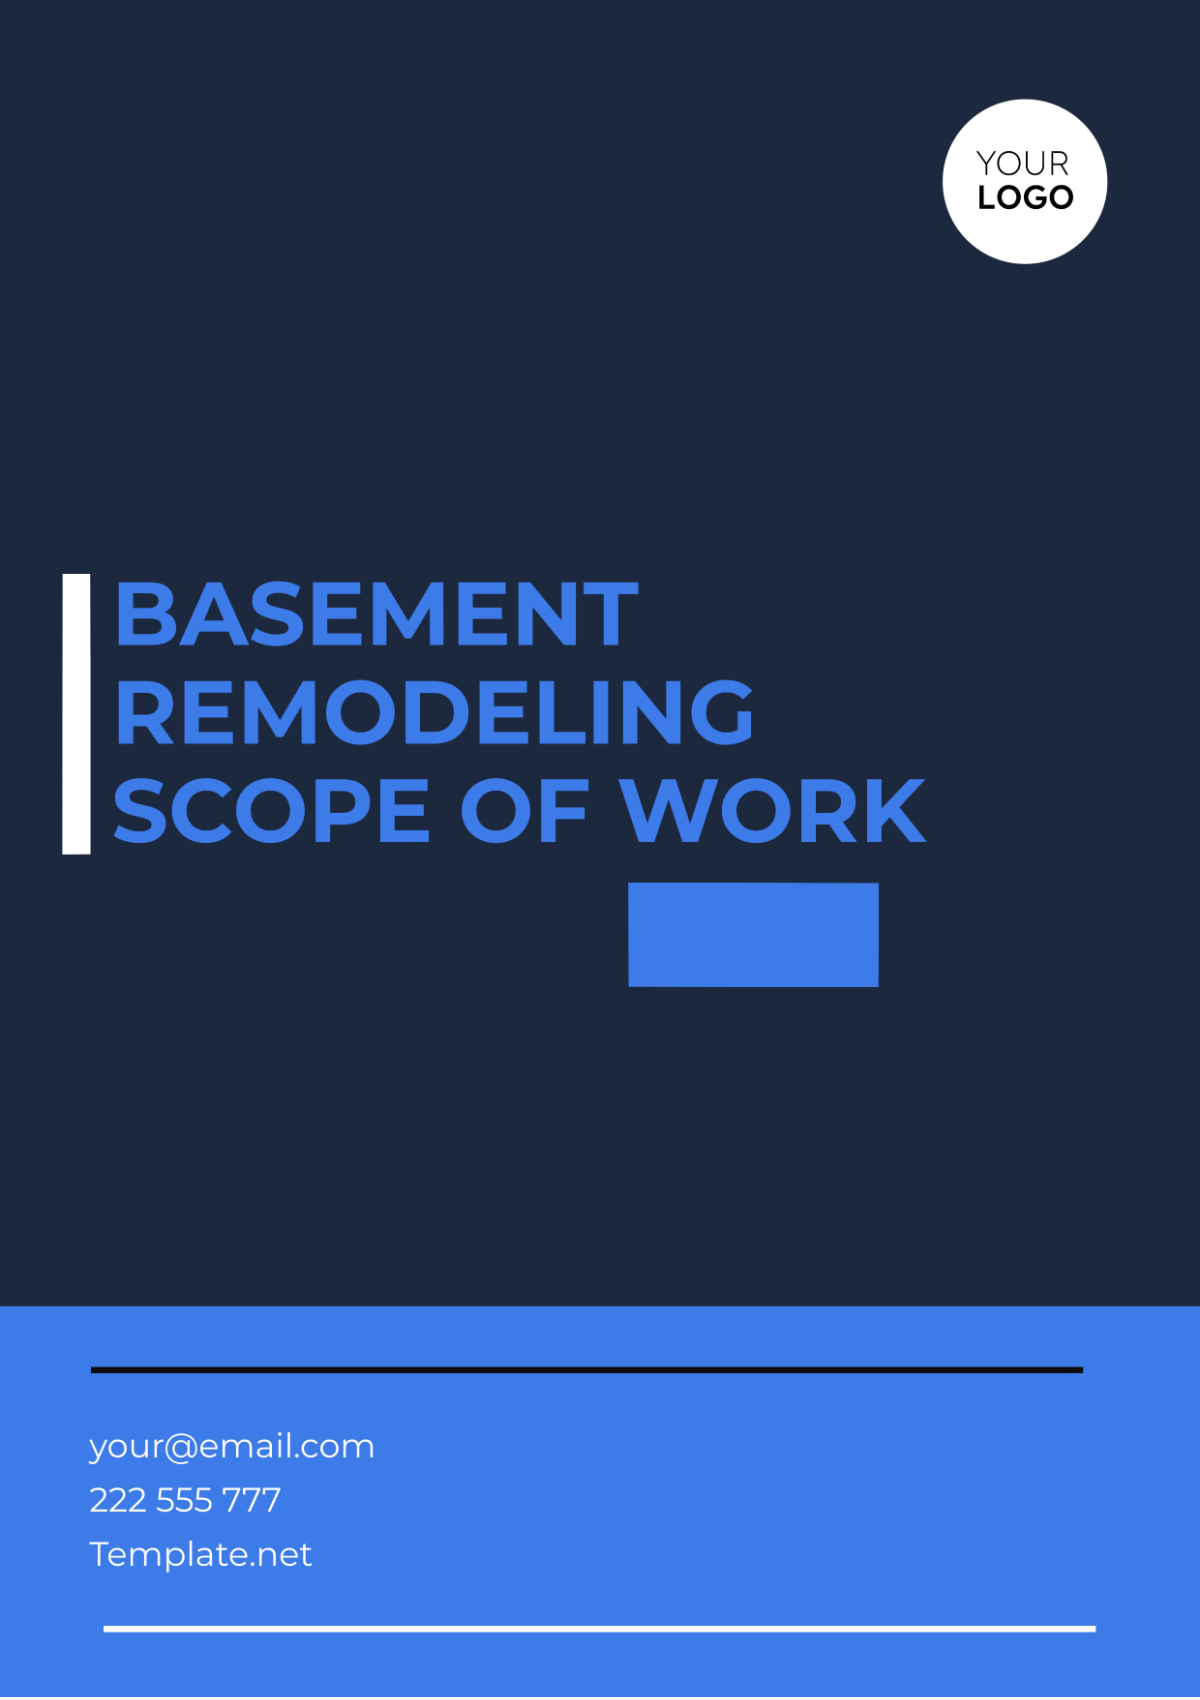 Free Basement Remodeling Scope of Work Template